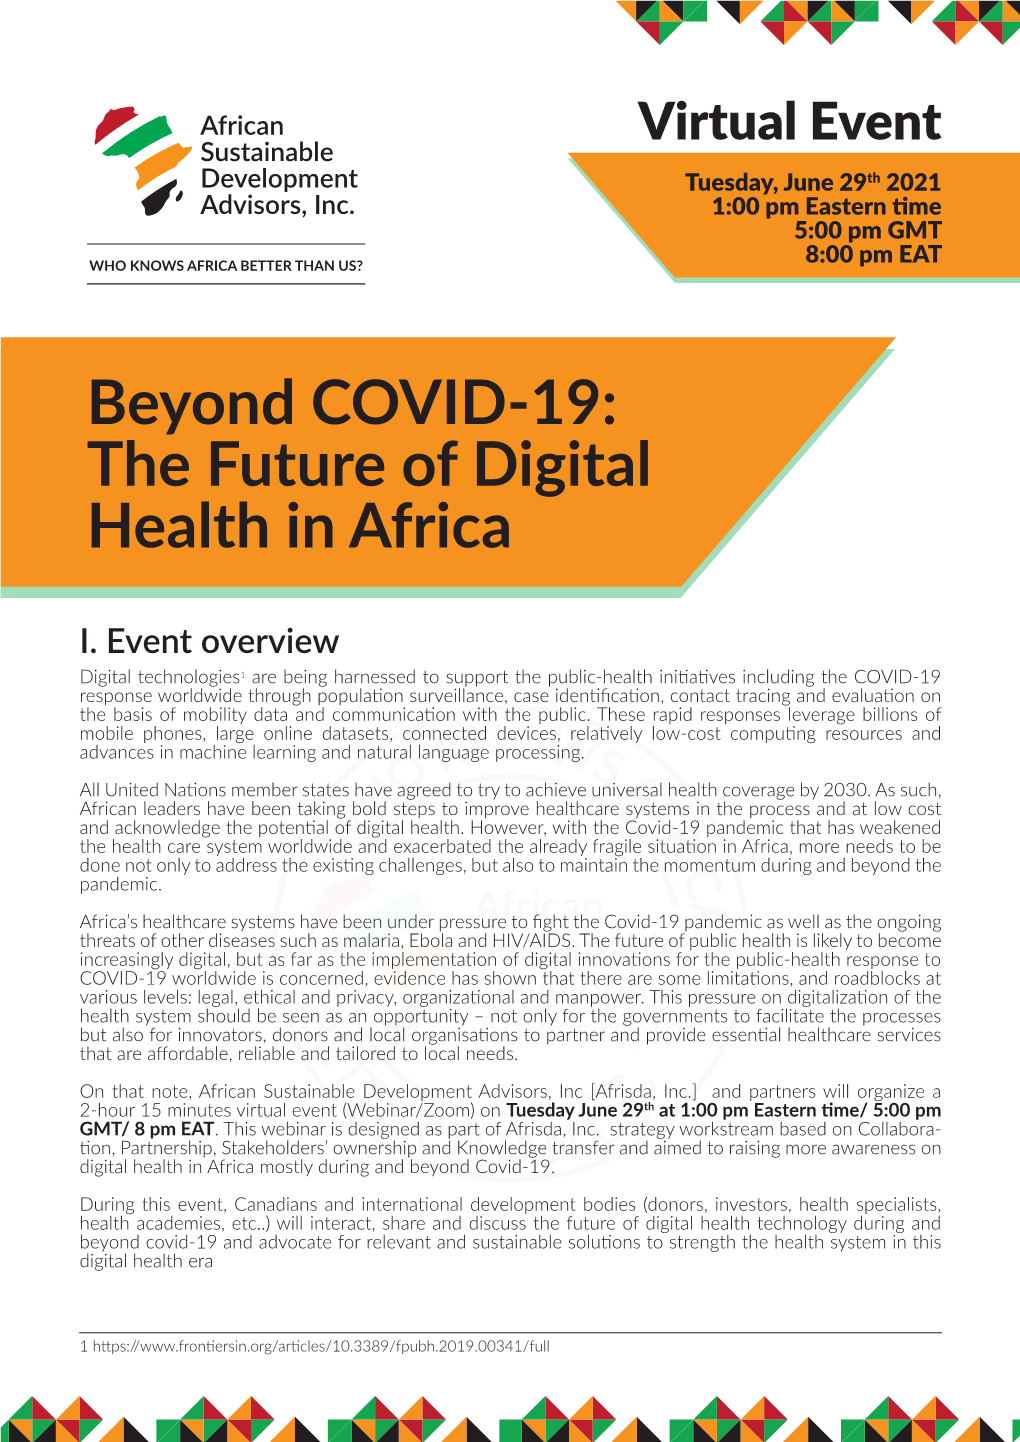 Beyond COVID-19: the Future of Digital Health in Africa